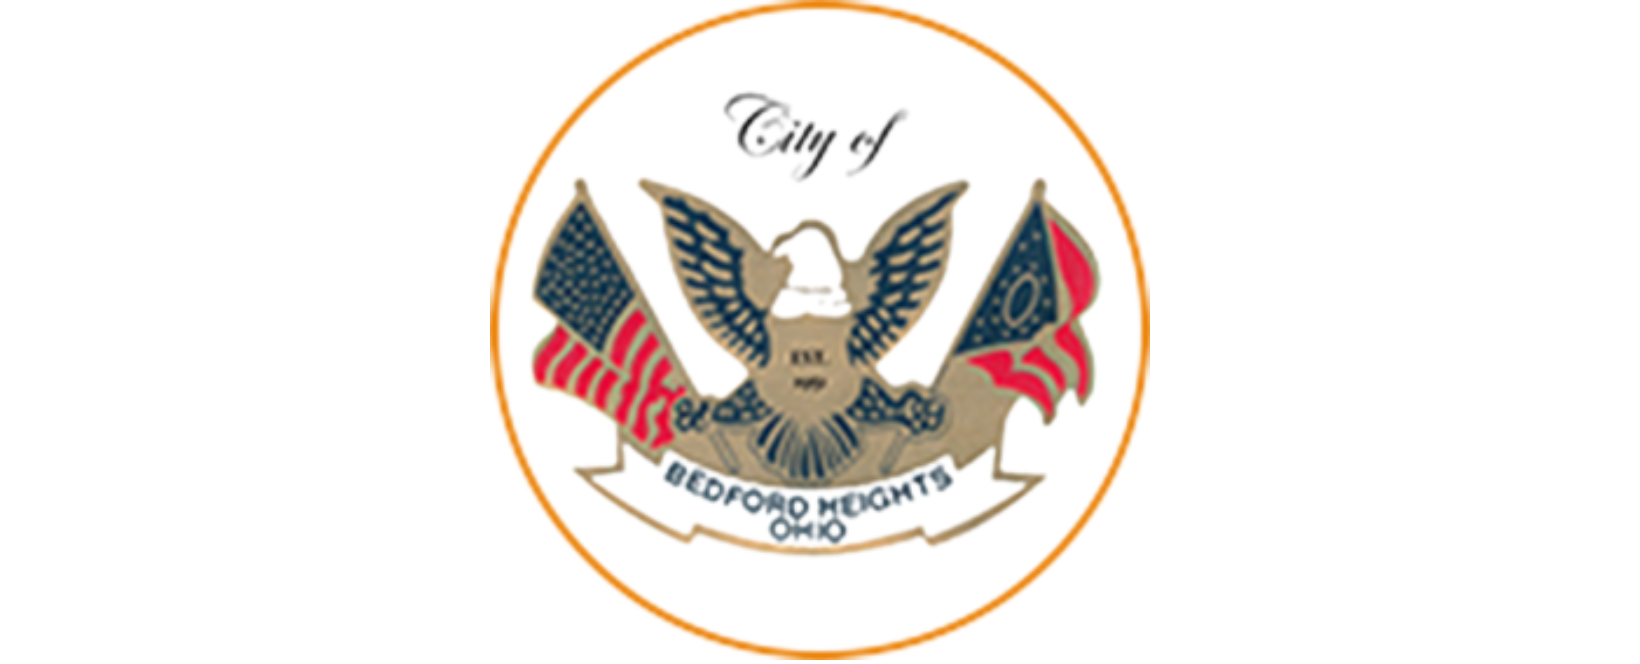 City of Bedford Heights logo